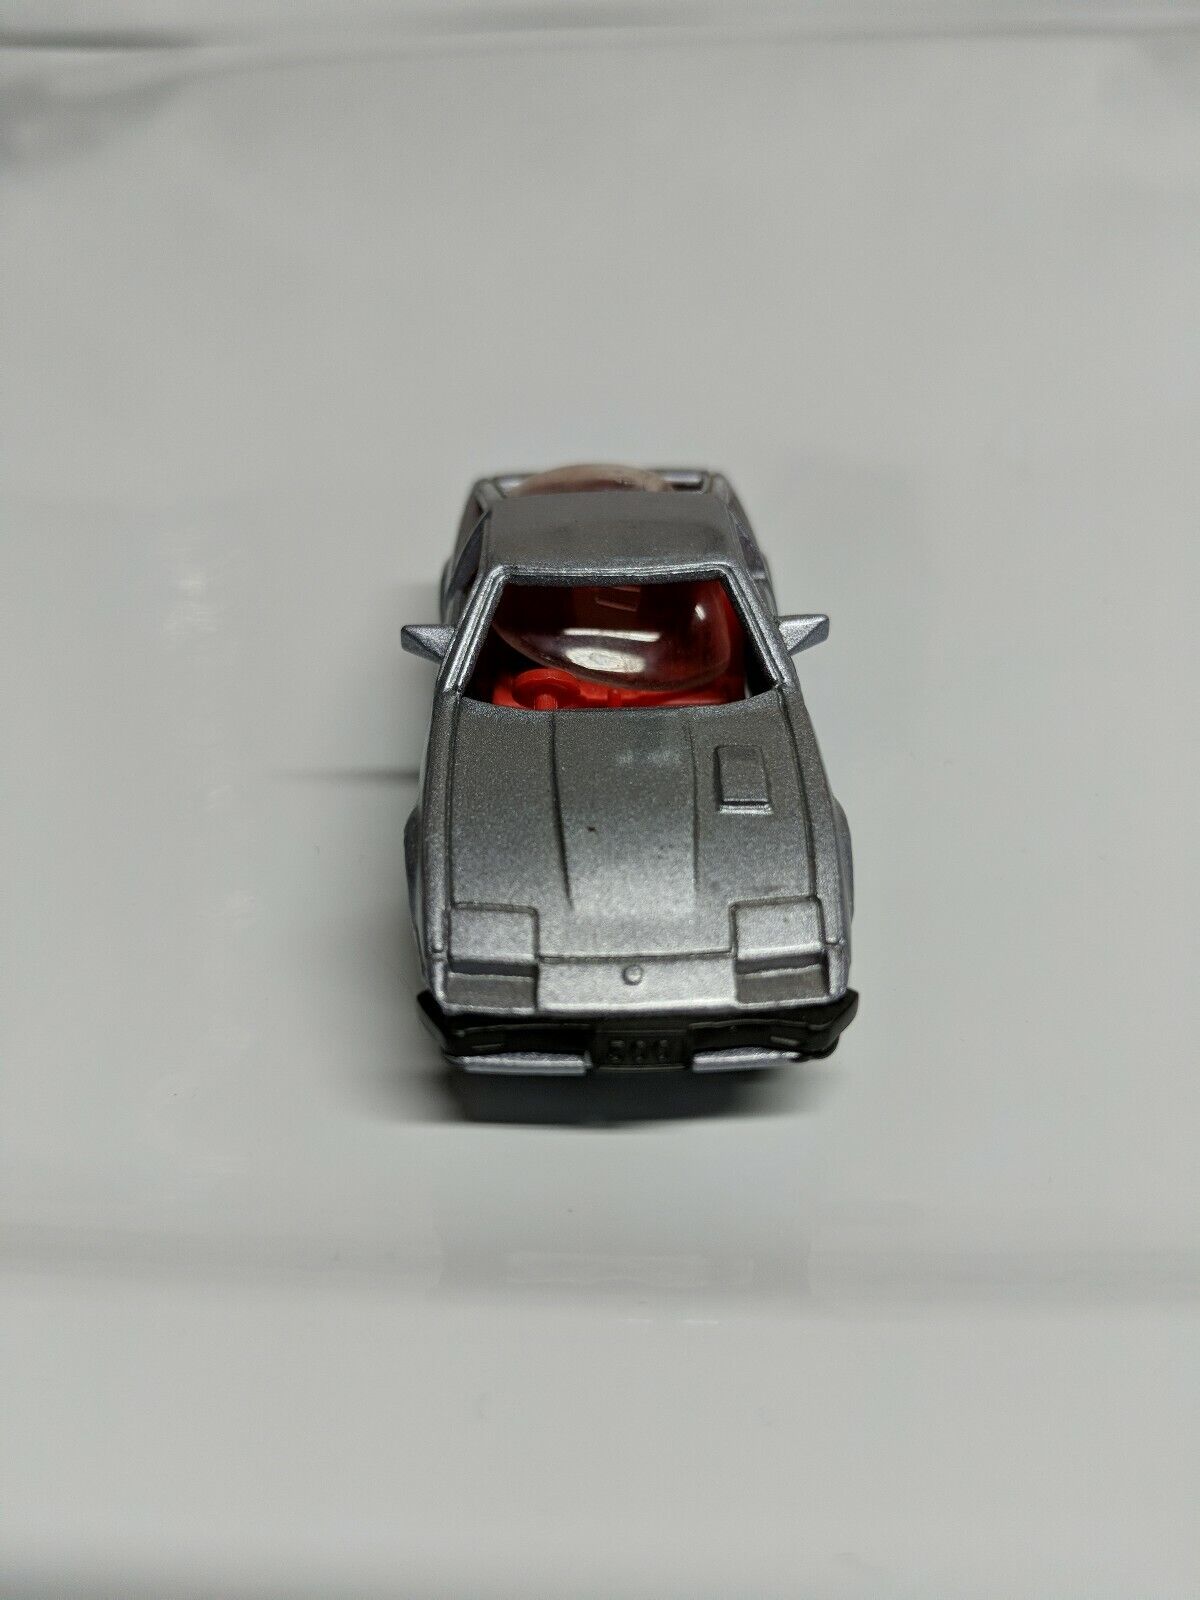 Tomy Tomica Nissan Fairlady Z-300ZX No. 15 Silver V6 Turbo 1:61 Made in  Japan